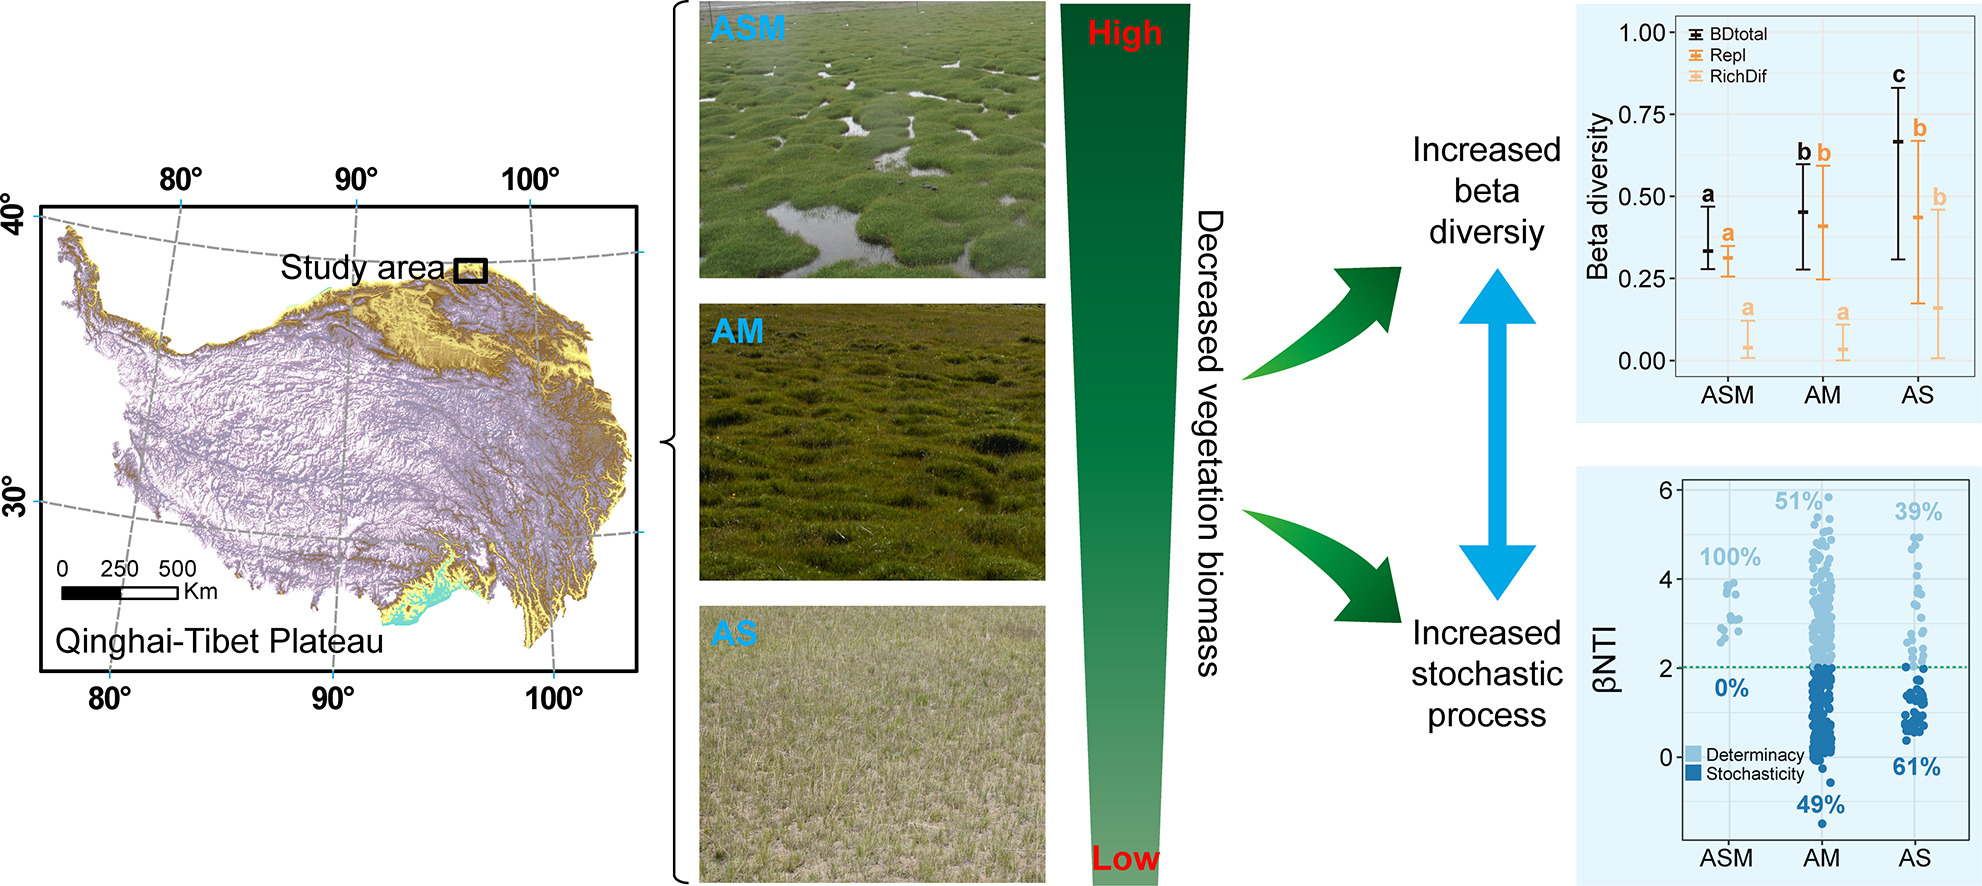 Vegetation Biomass Affects Soil Microbial Distribution and Assembly in Alpine Permafrost Regions